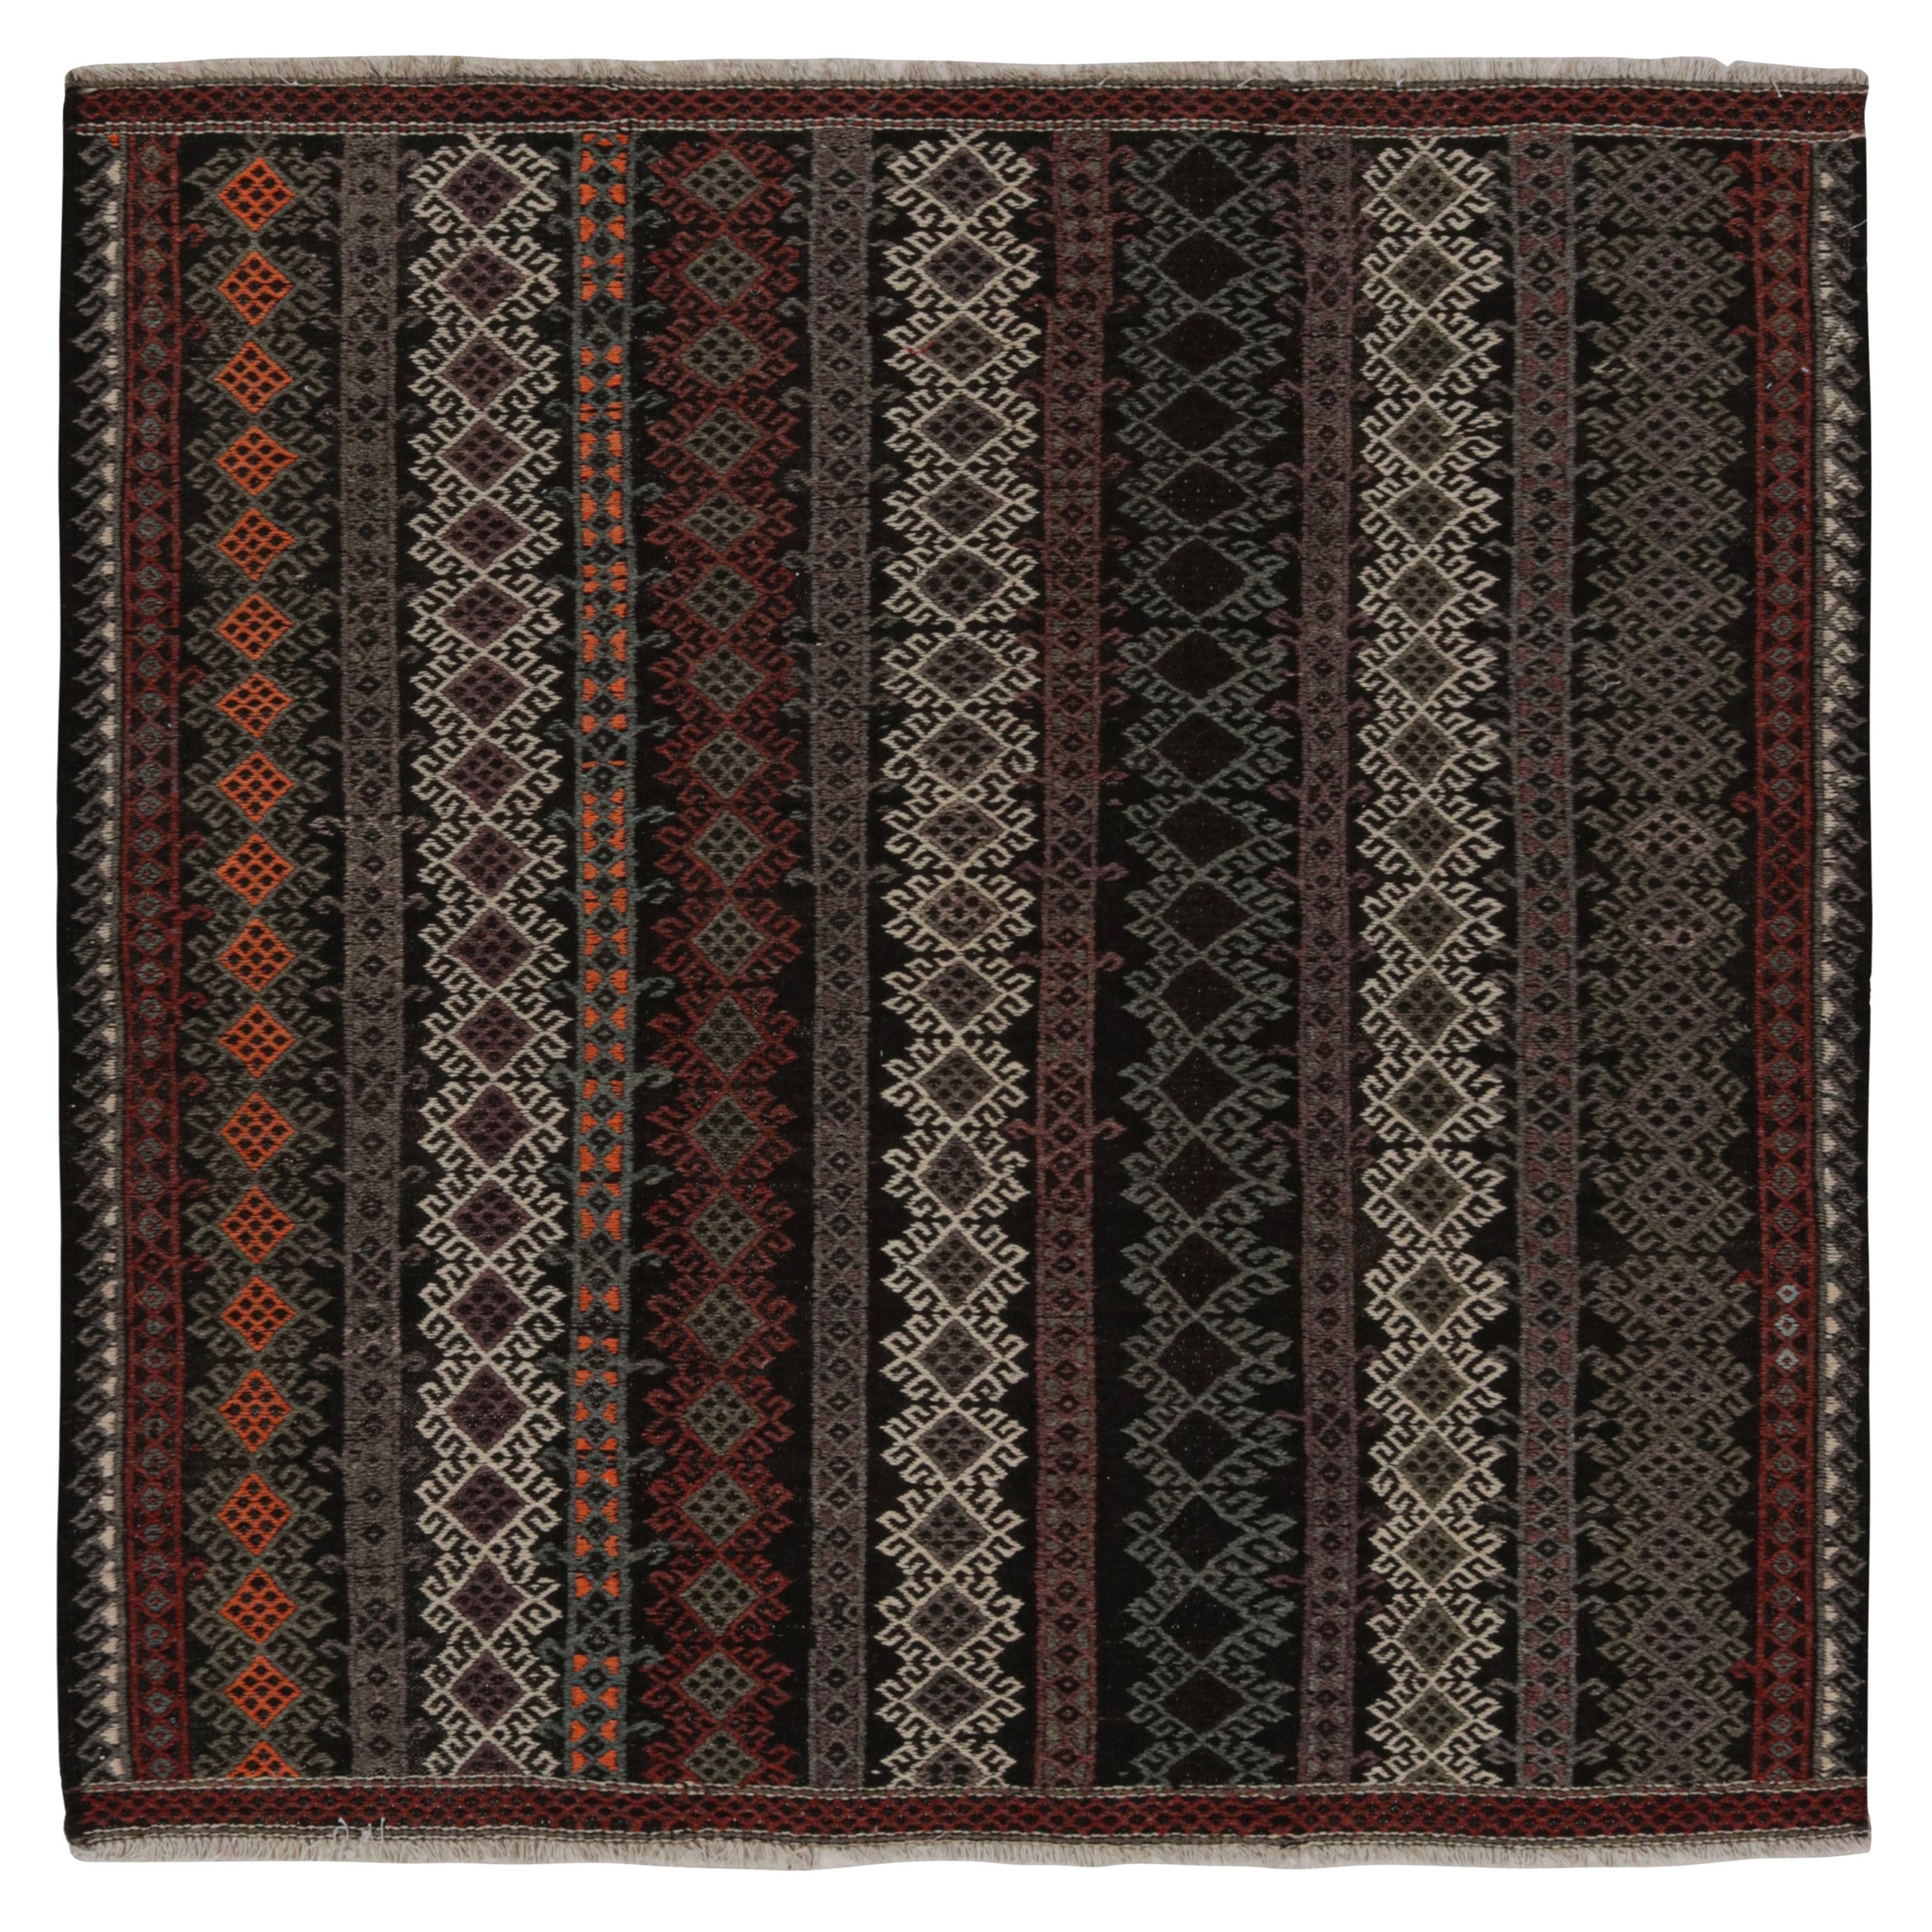 Vintage Turkish Square Rug, with Geometric Patterns, from Rug & Kilim